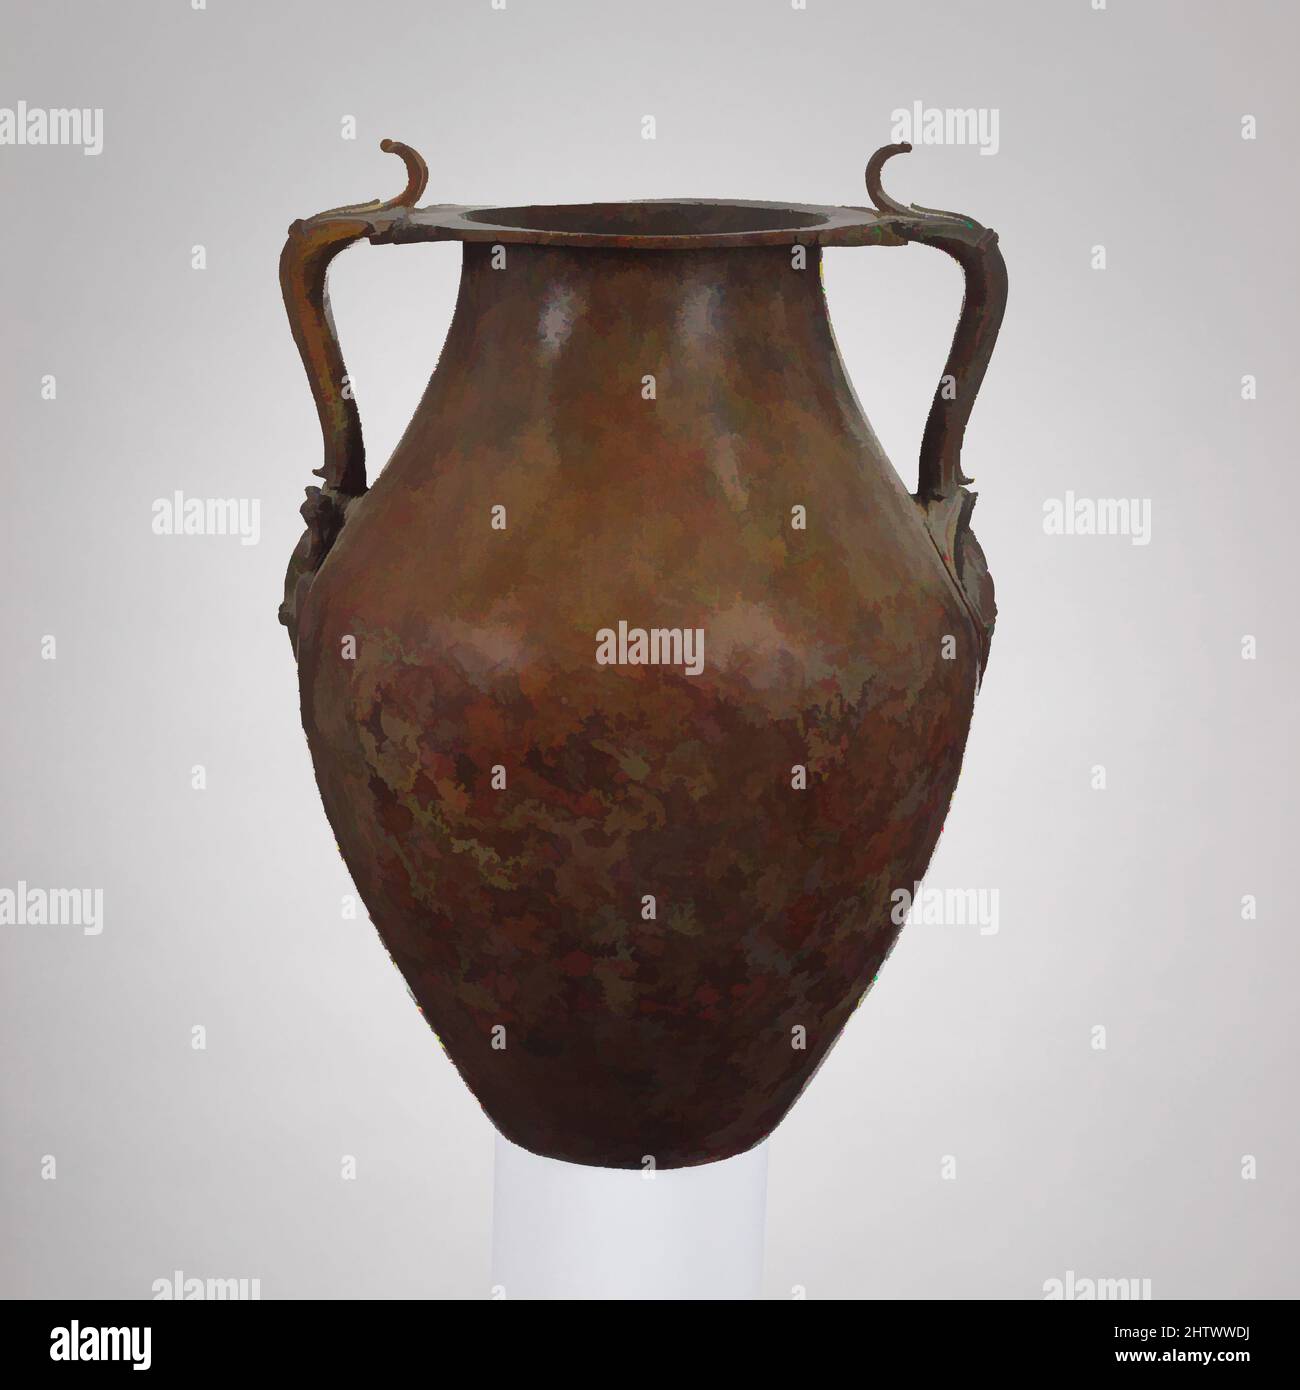 Art inspired by Bronze jar with two handles, Imperial, 1st century A.D., Roman, Bronze, H. 16 1/16 in. (40.3 cm), Bronzes, The handles have been restored, possibly in antiquity, Classic works modernized by Artotop with a splash of modernity. Shapes, color and value, eye-catching visual impact on art. Emotions through freedom of artworks in a contemporary way. A timeless message pursuing a wildly creative new direction. Artists turning to the digital medium and creating the Artotop NFT Stock Photo